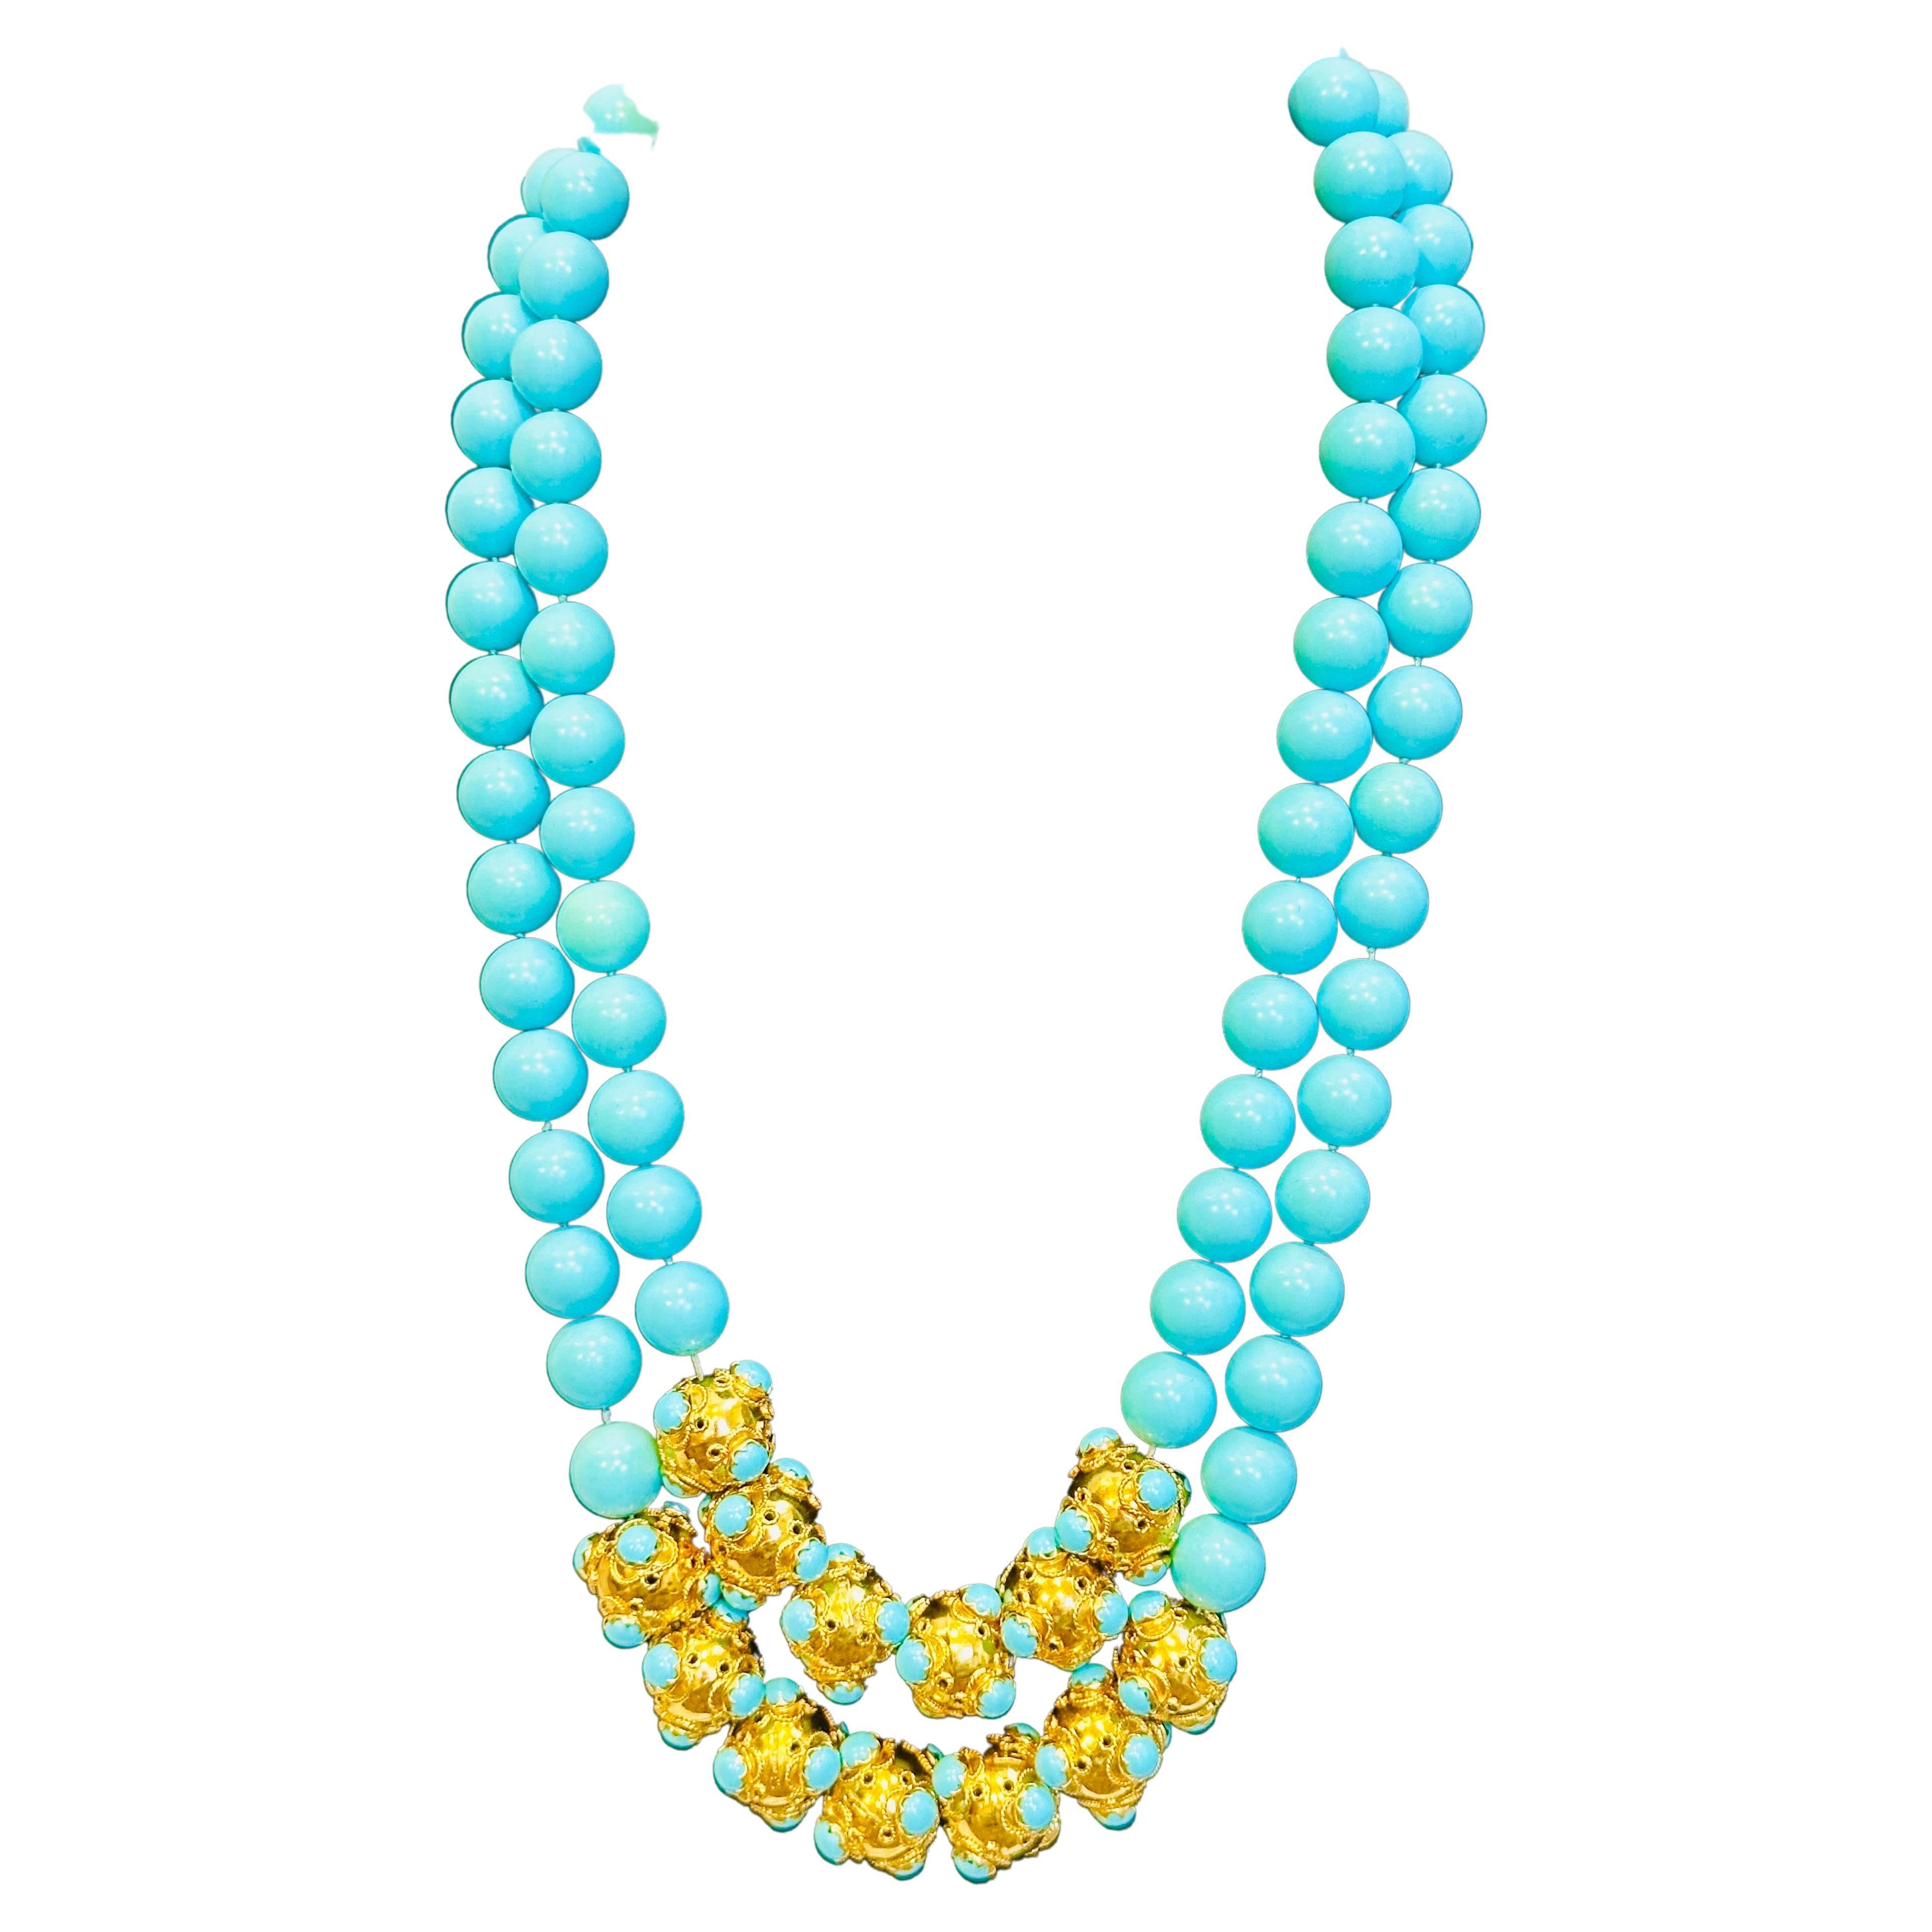 Vintage 600 Carat Natural Sleeping Beauty Turquoise Necklace, Two Strand 18 Karat Gold
Natural Sleeping Beauty Turquoise which is very hard to find now.
Necklace has 2 strand
Approximately 11 mm each bead
18 Karat  Yellow gold clasp
18 Karat yellow